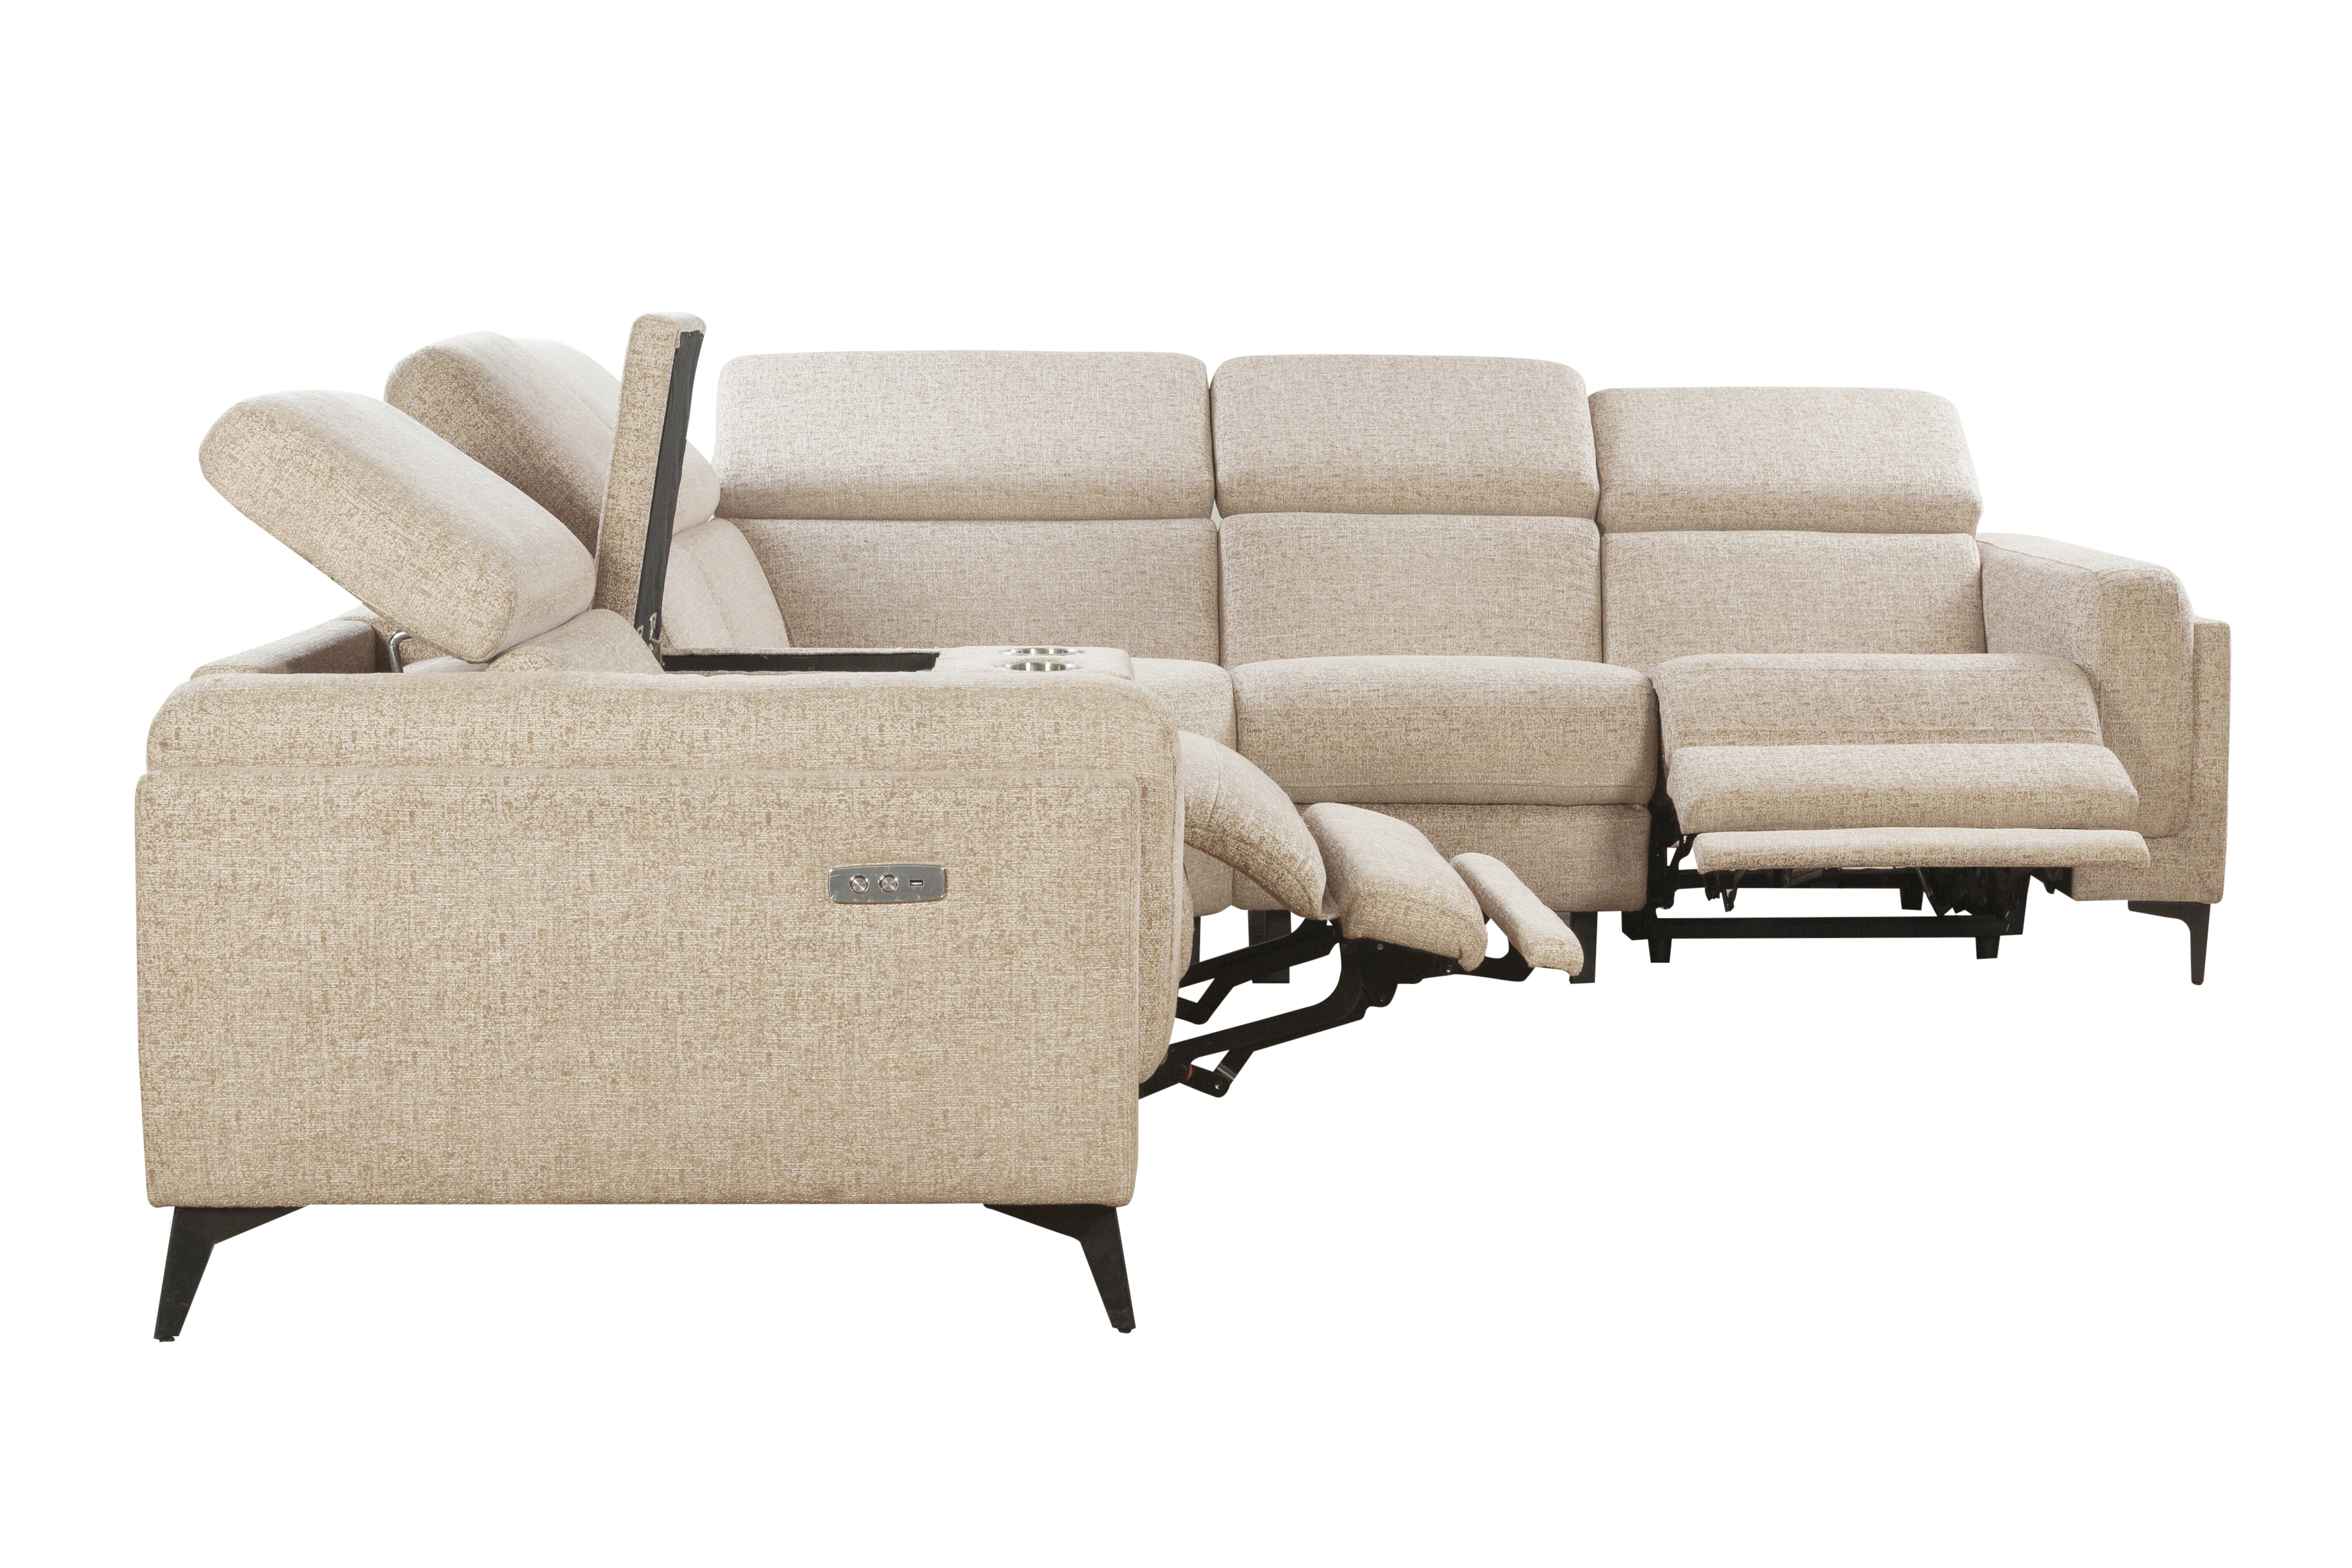 Victorville Electric Recliner Lounger